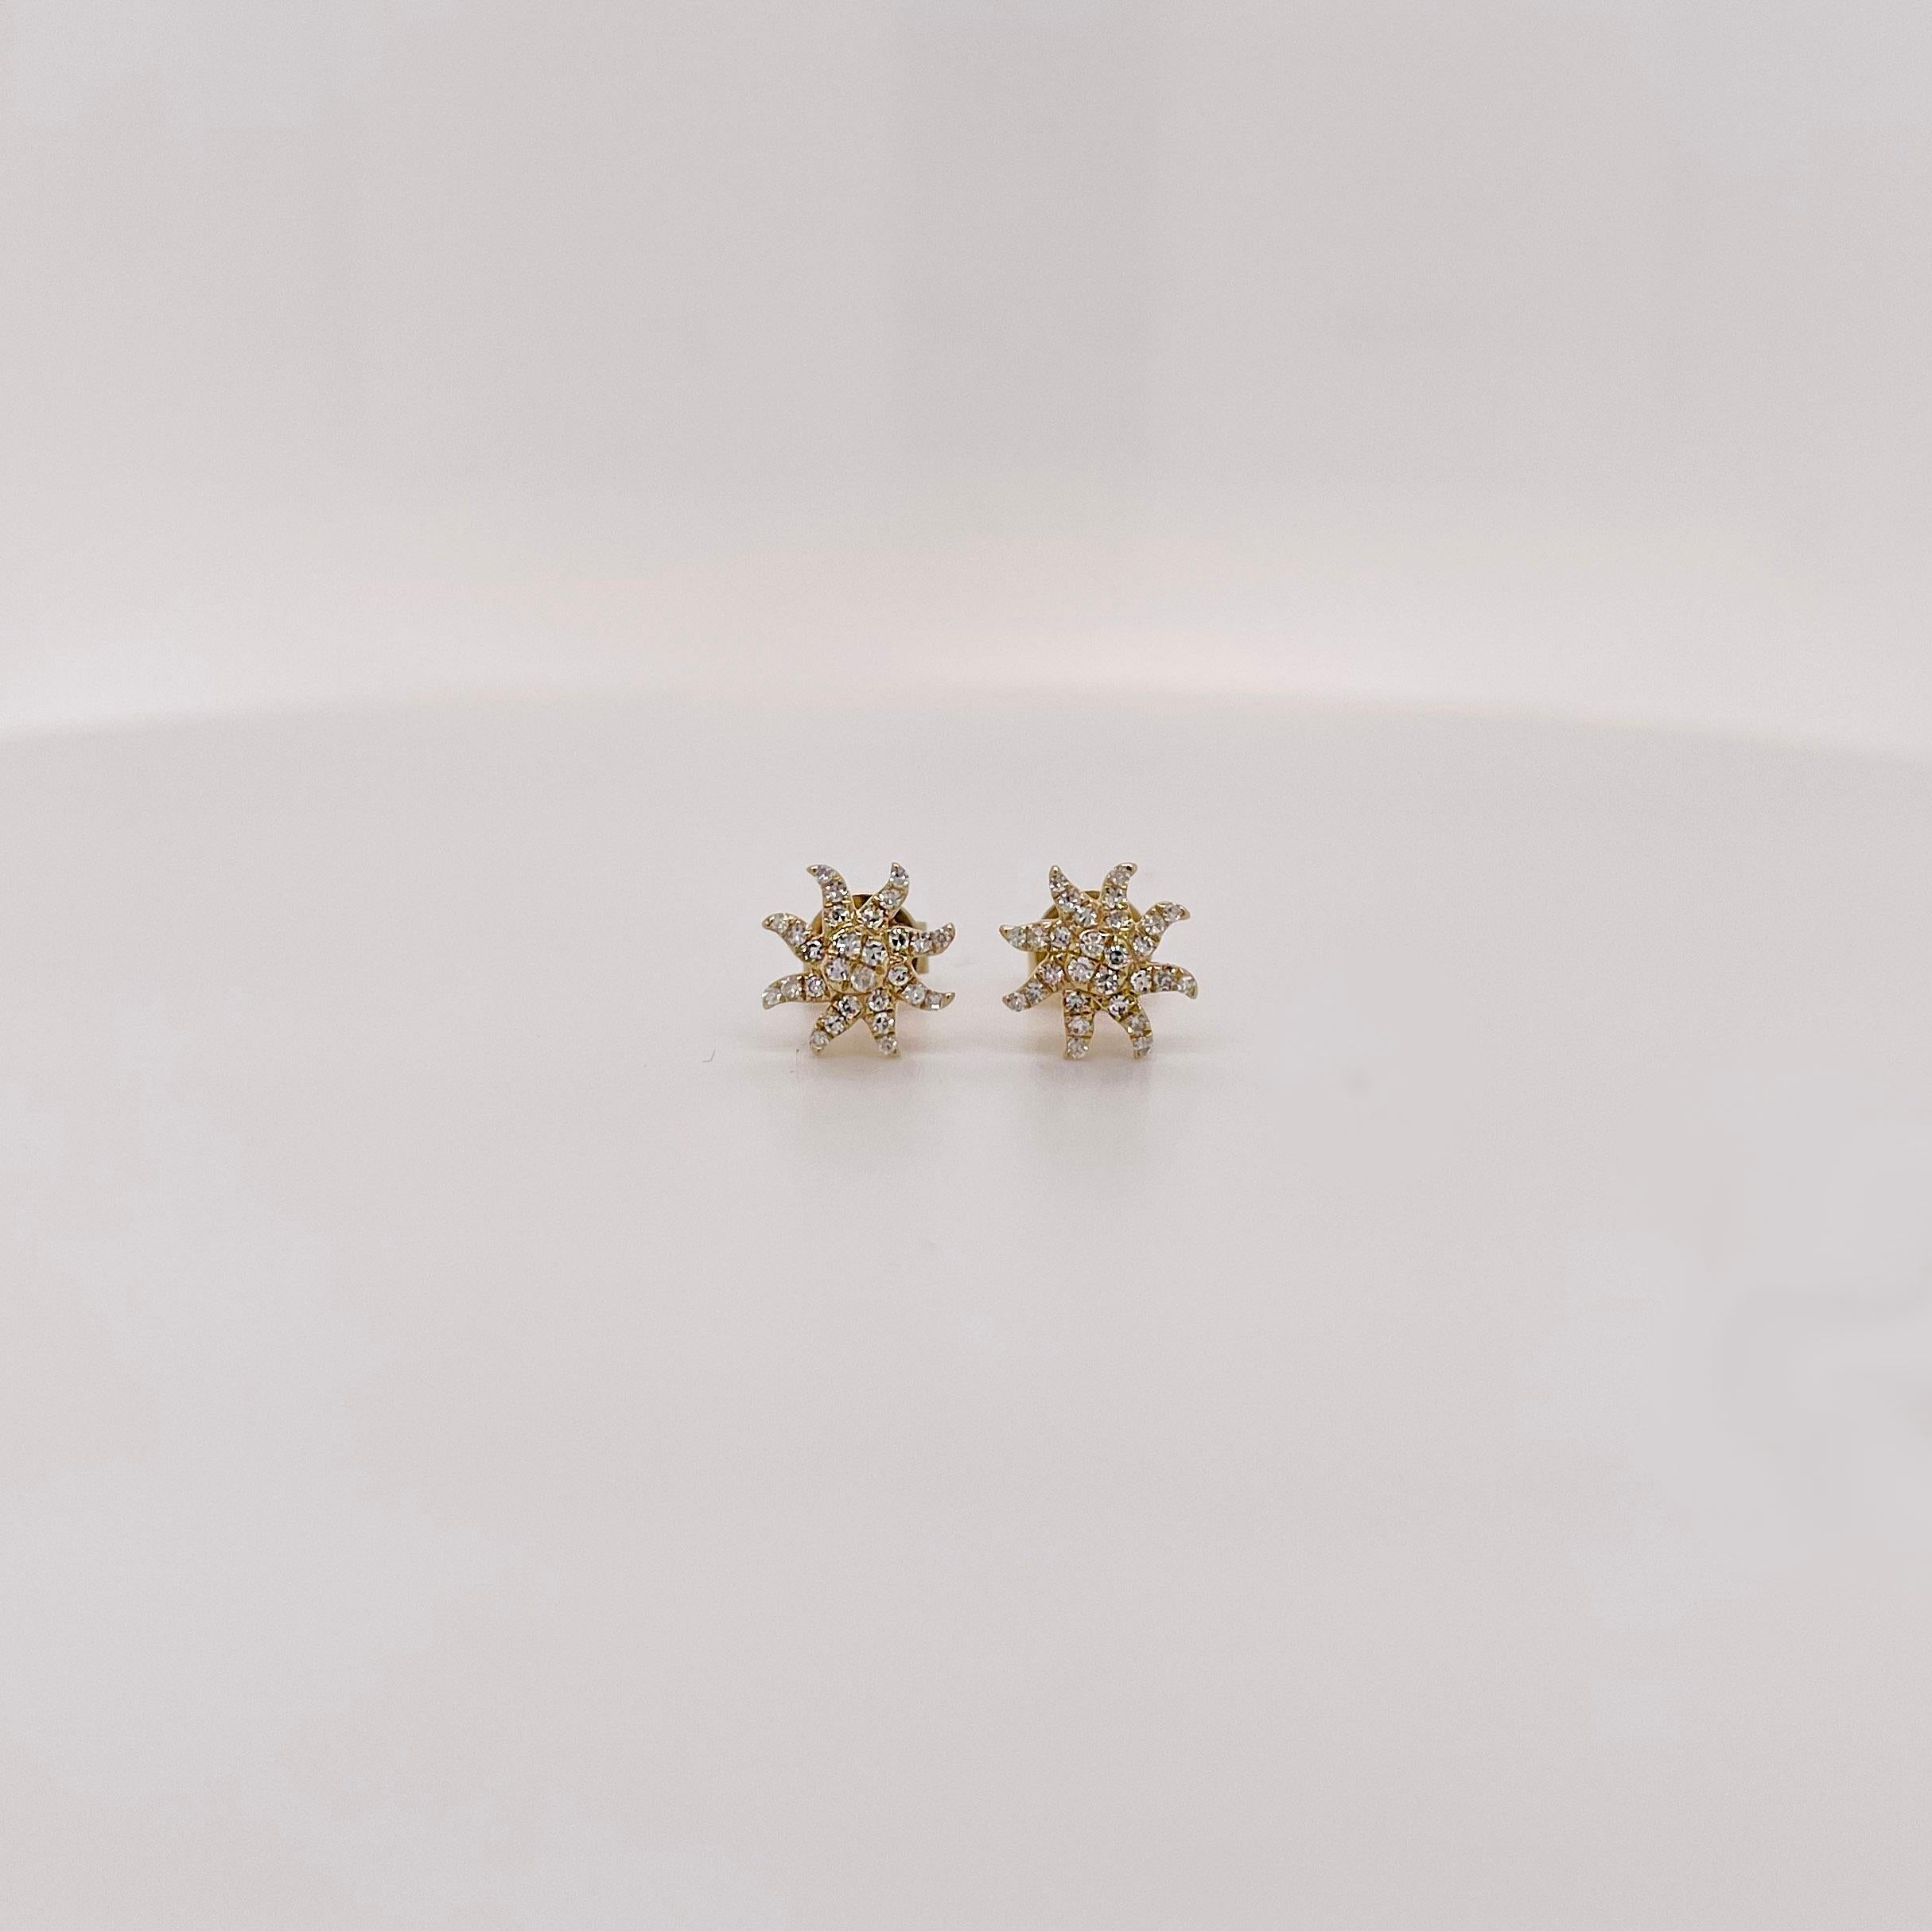 Looking for a new cute pair of diamond studs? These starburst diamond studs are the perfect addition to any fine jewelry collection! Made with genuine, natural diamonds and solid 14 karat yellow gold. Wear these as your signature piece or stack them